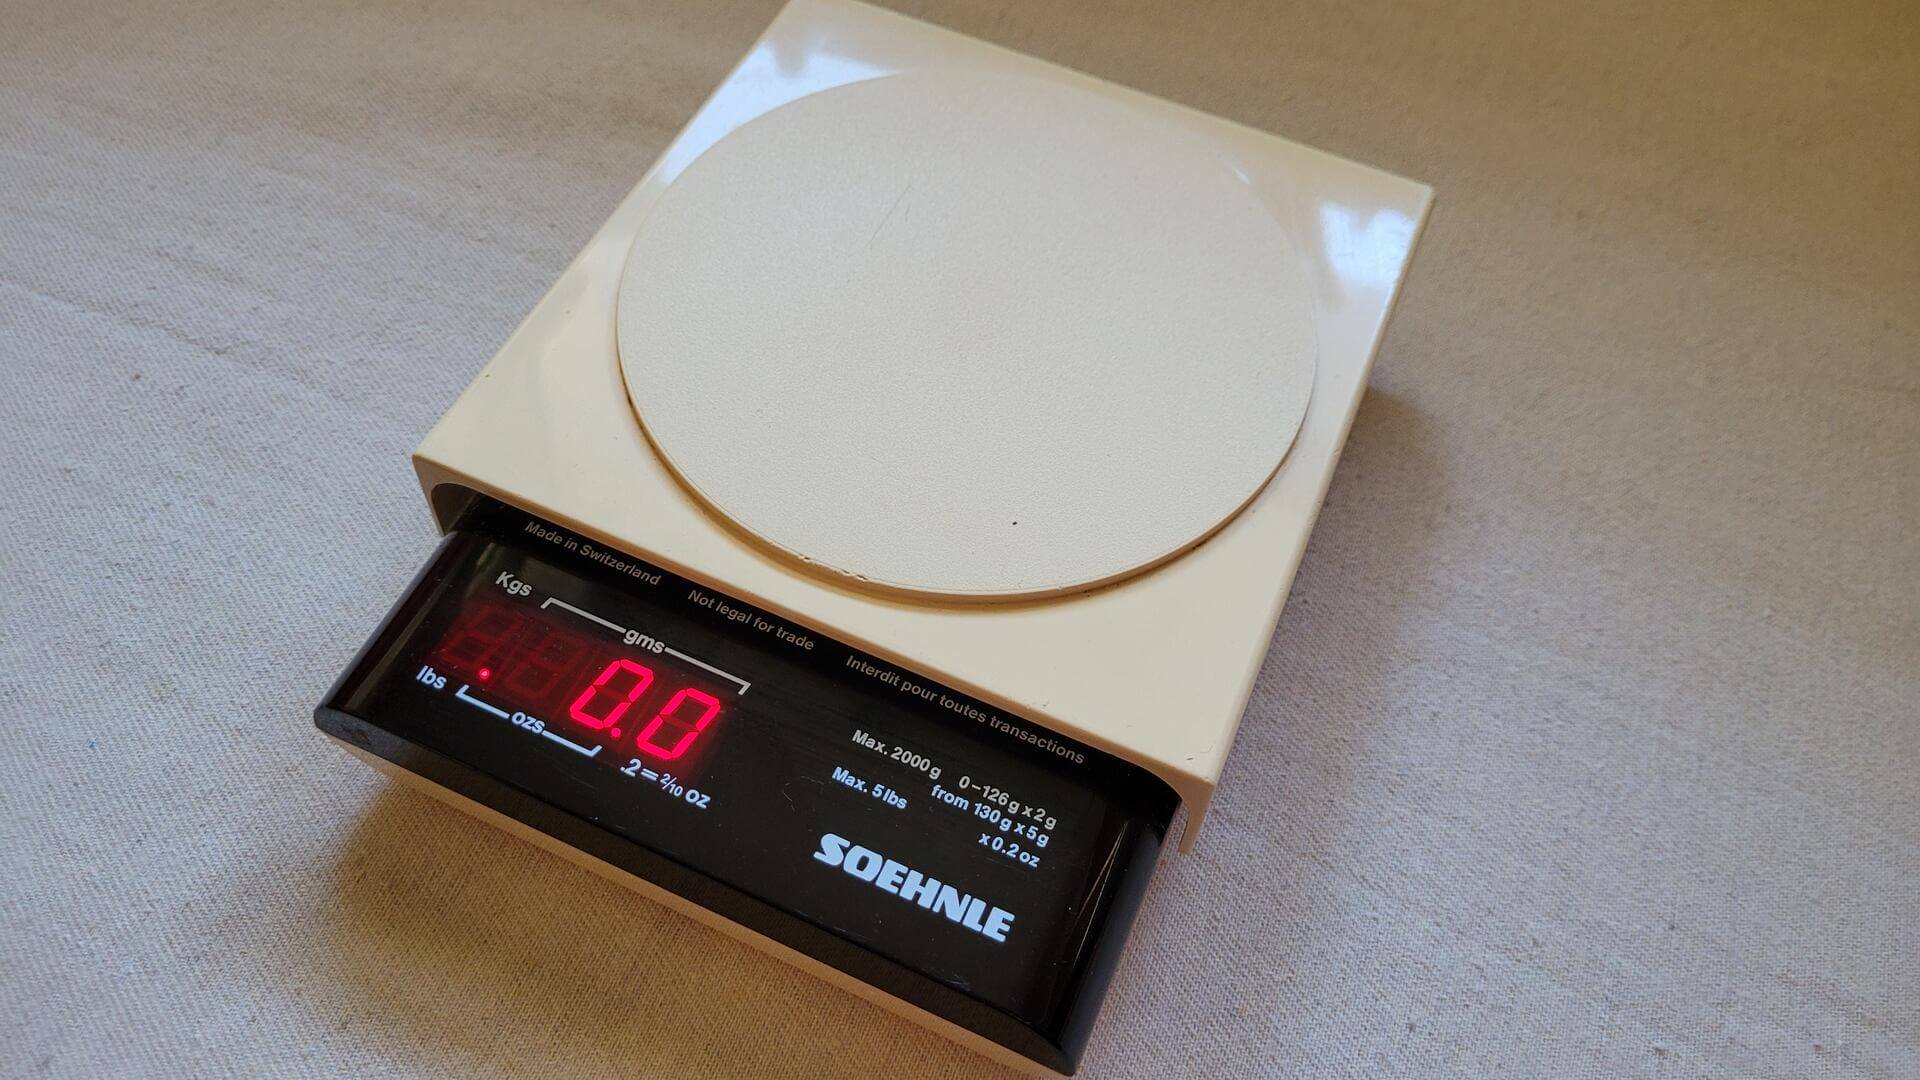 Rare Soehnle 2000G / 5LB LCD White Kitchen Scale Made in Switzerland - Vintage retro design antique collectible kitchenware and measuring tools